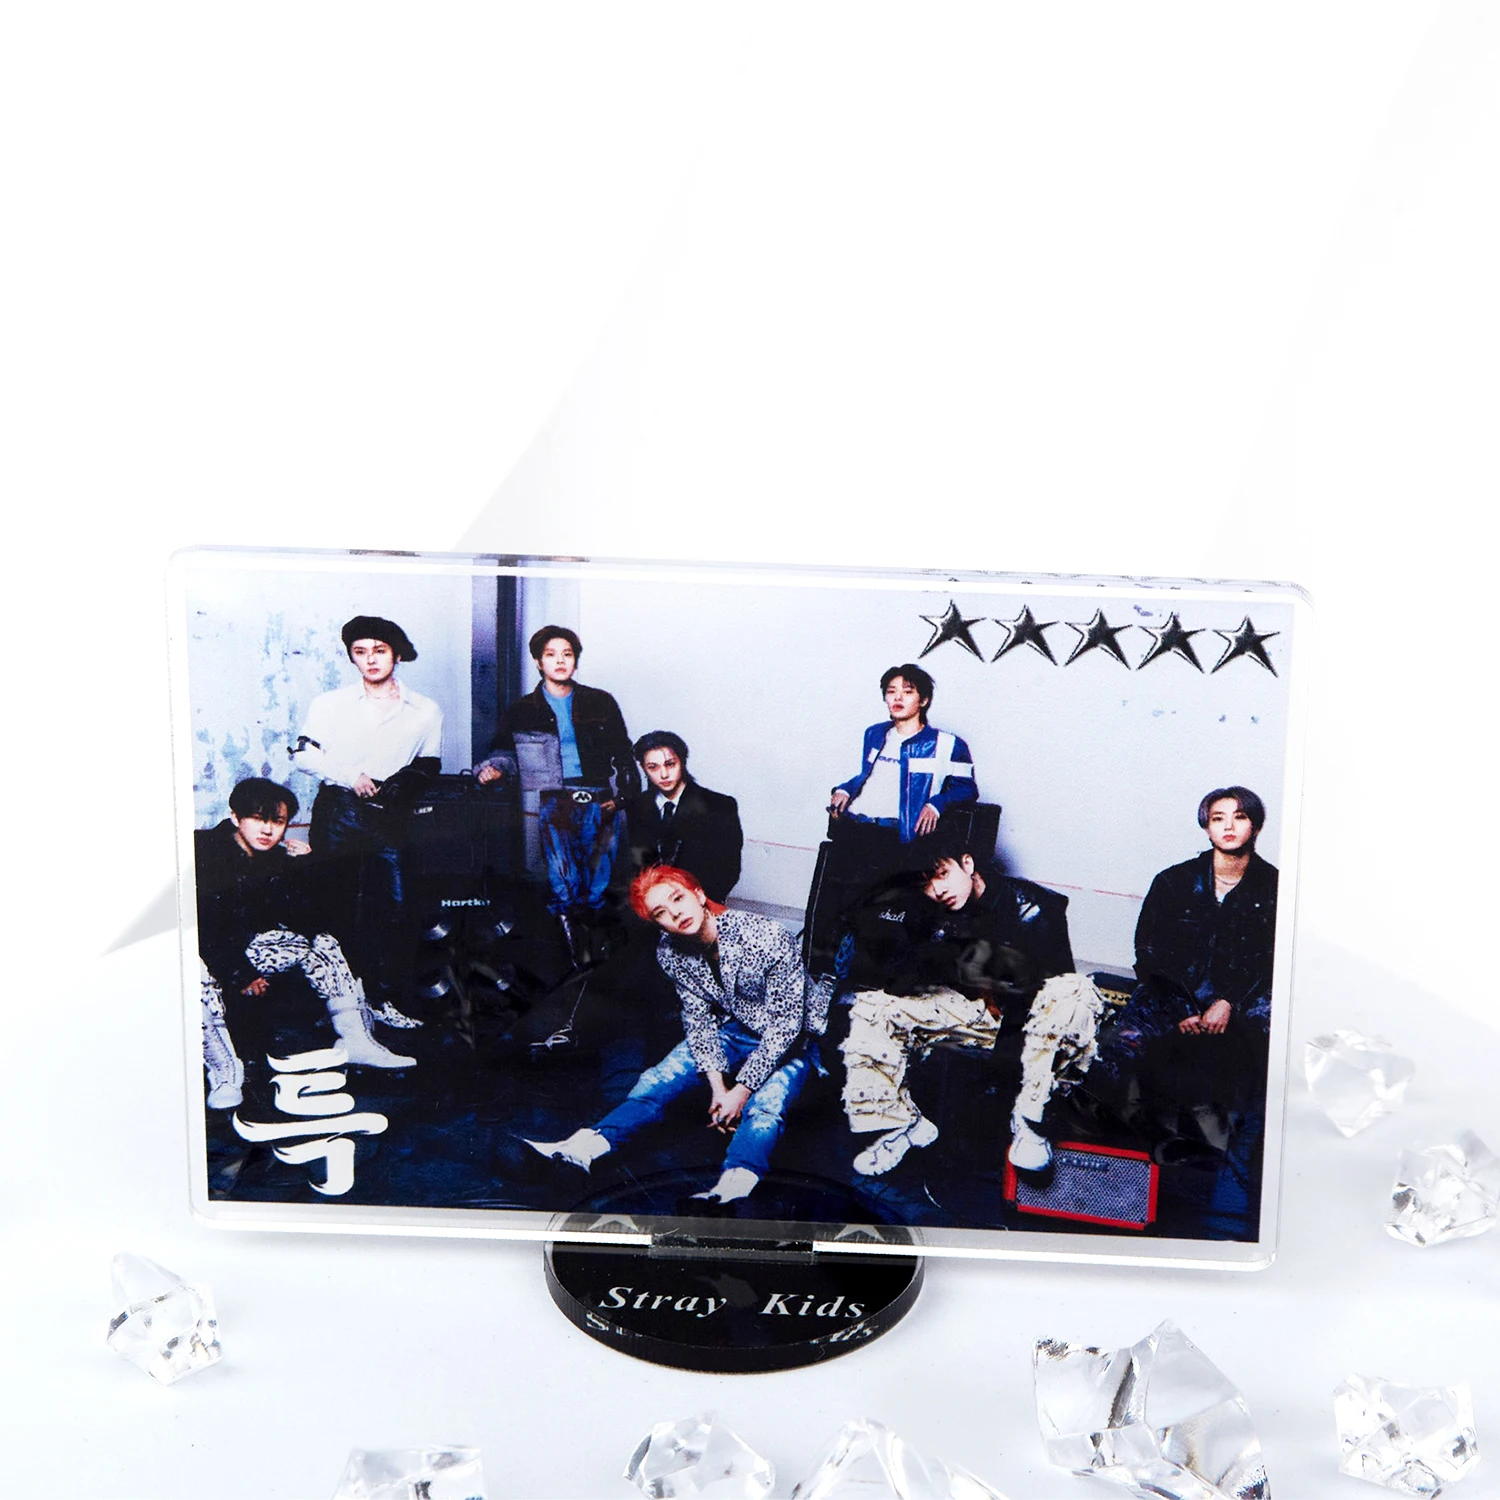 8pcs/sey Kpop Stray Kids 5-STAR Photocards Five Star for Fans Collection -  AliExpress